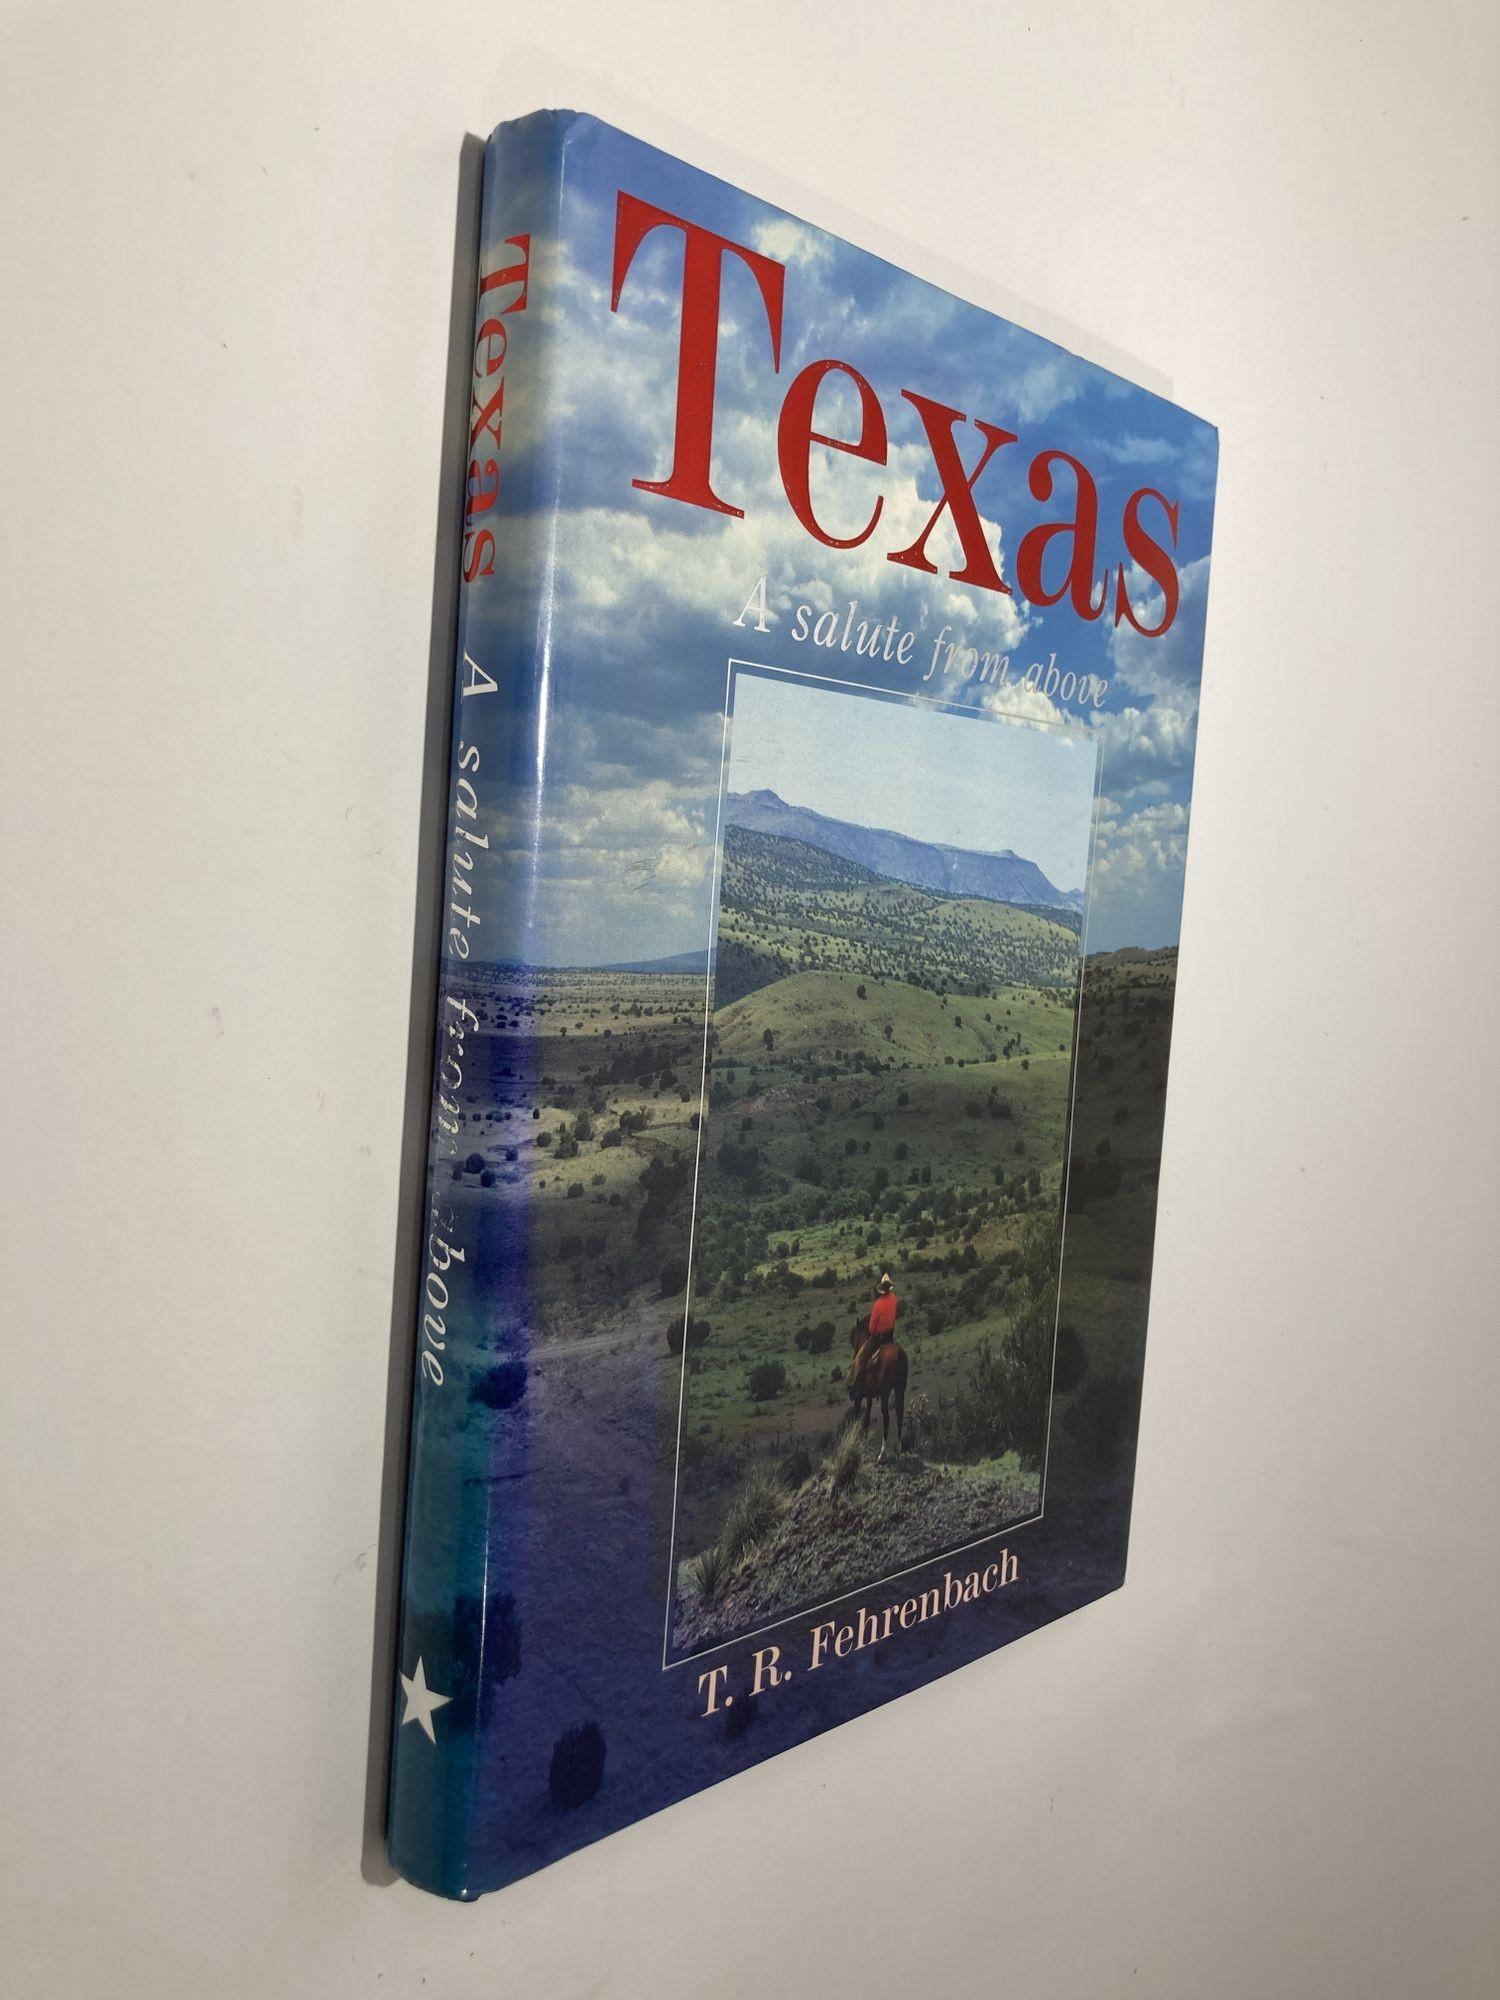 American Classical Texas a Salute from Above Fehrenbach, T. R 1985 For Sale